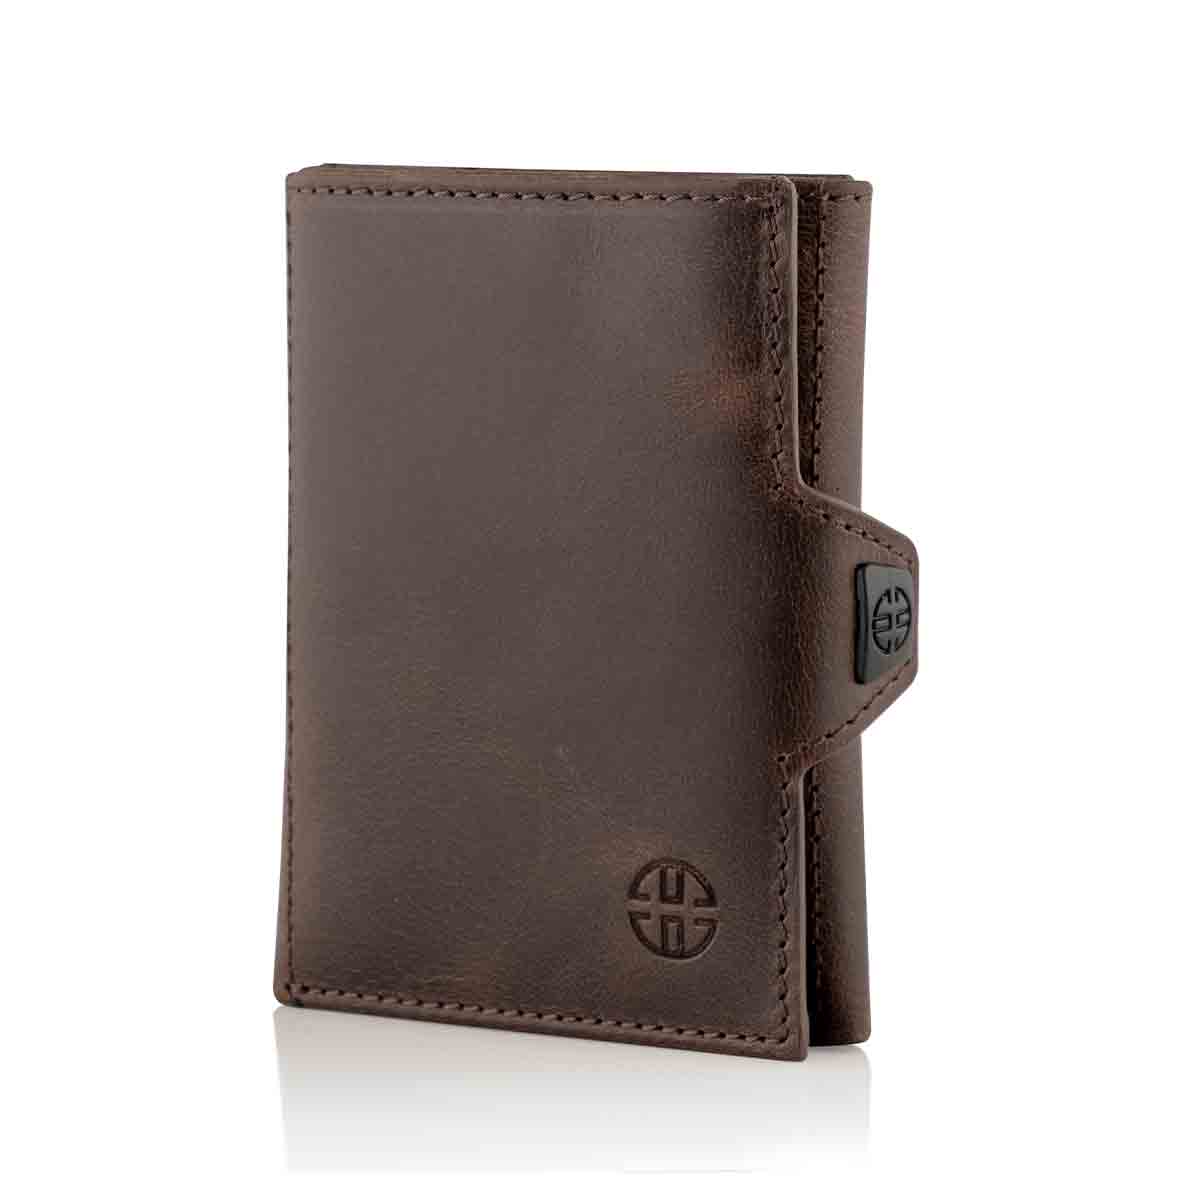 Hand Crafted Top Grain Leather Envelope Clutch Wallet RFID -  Israel